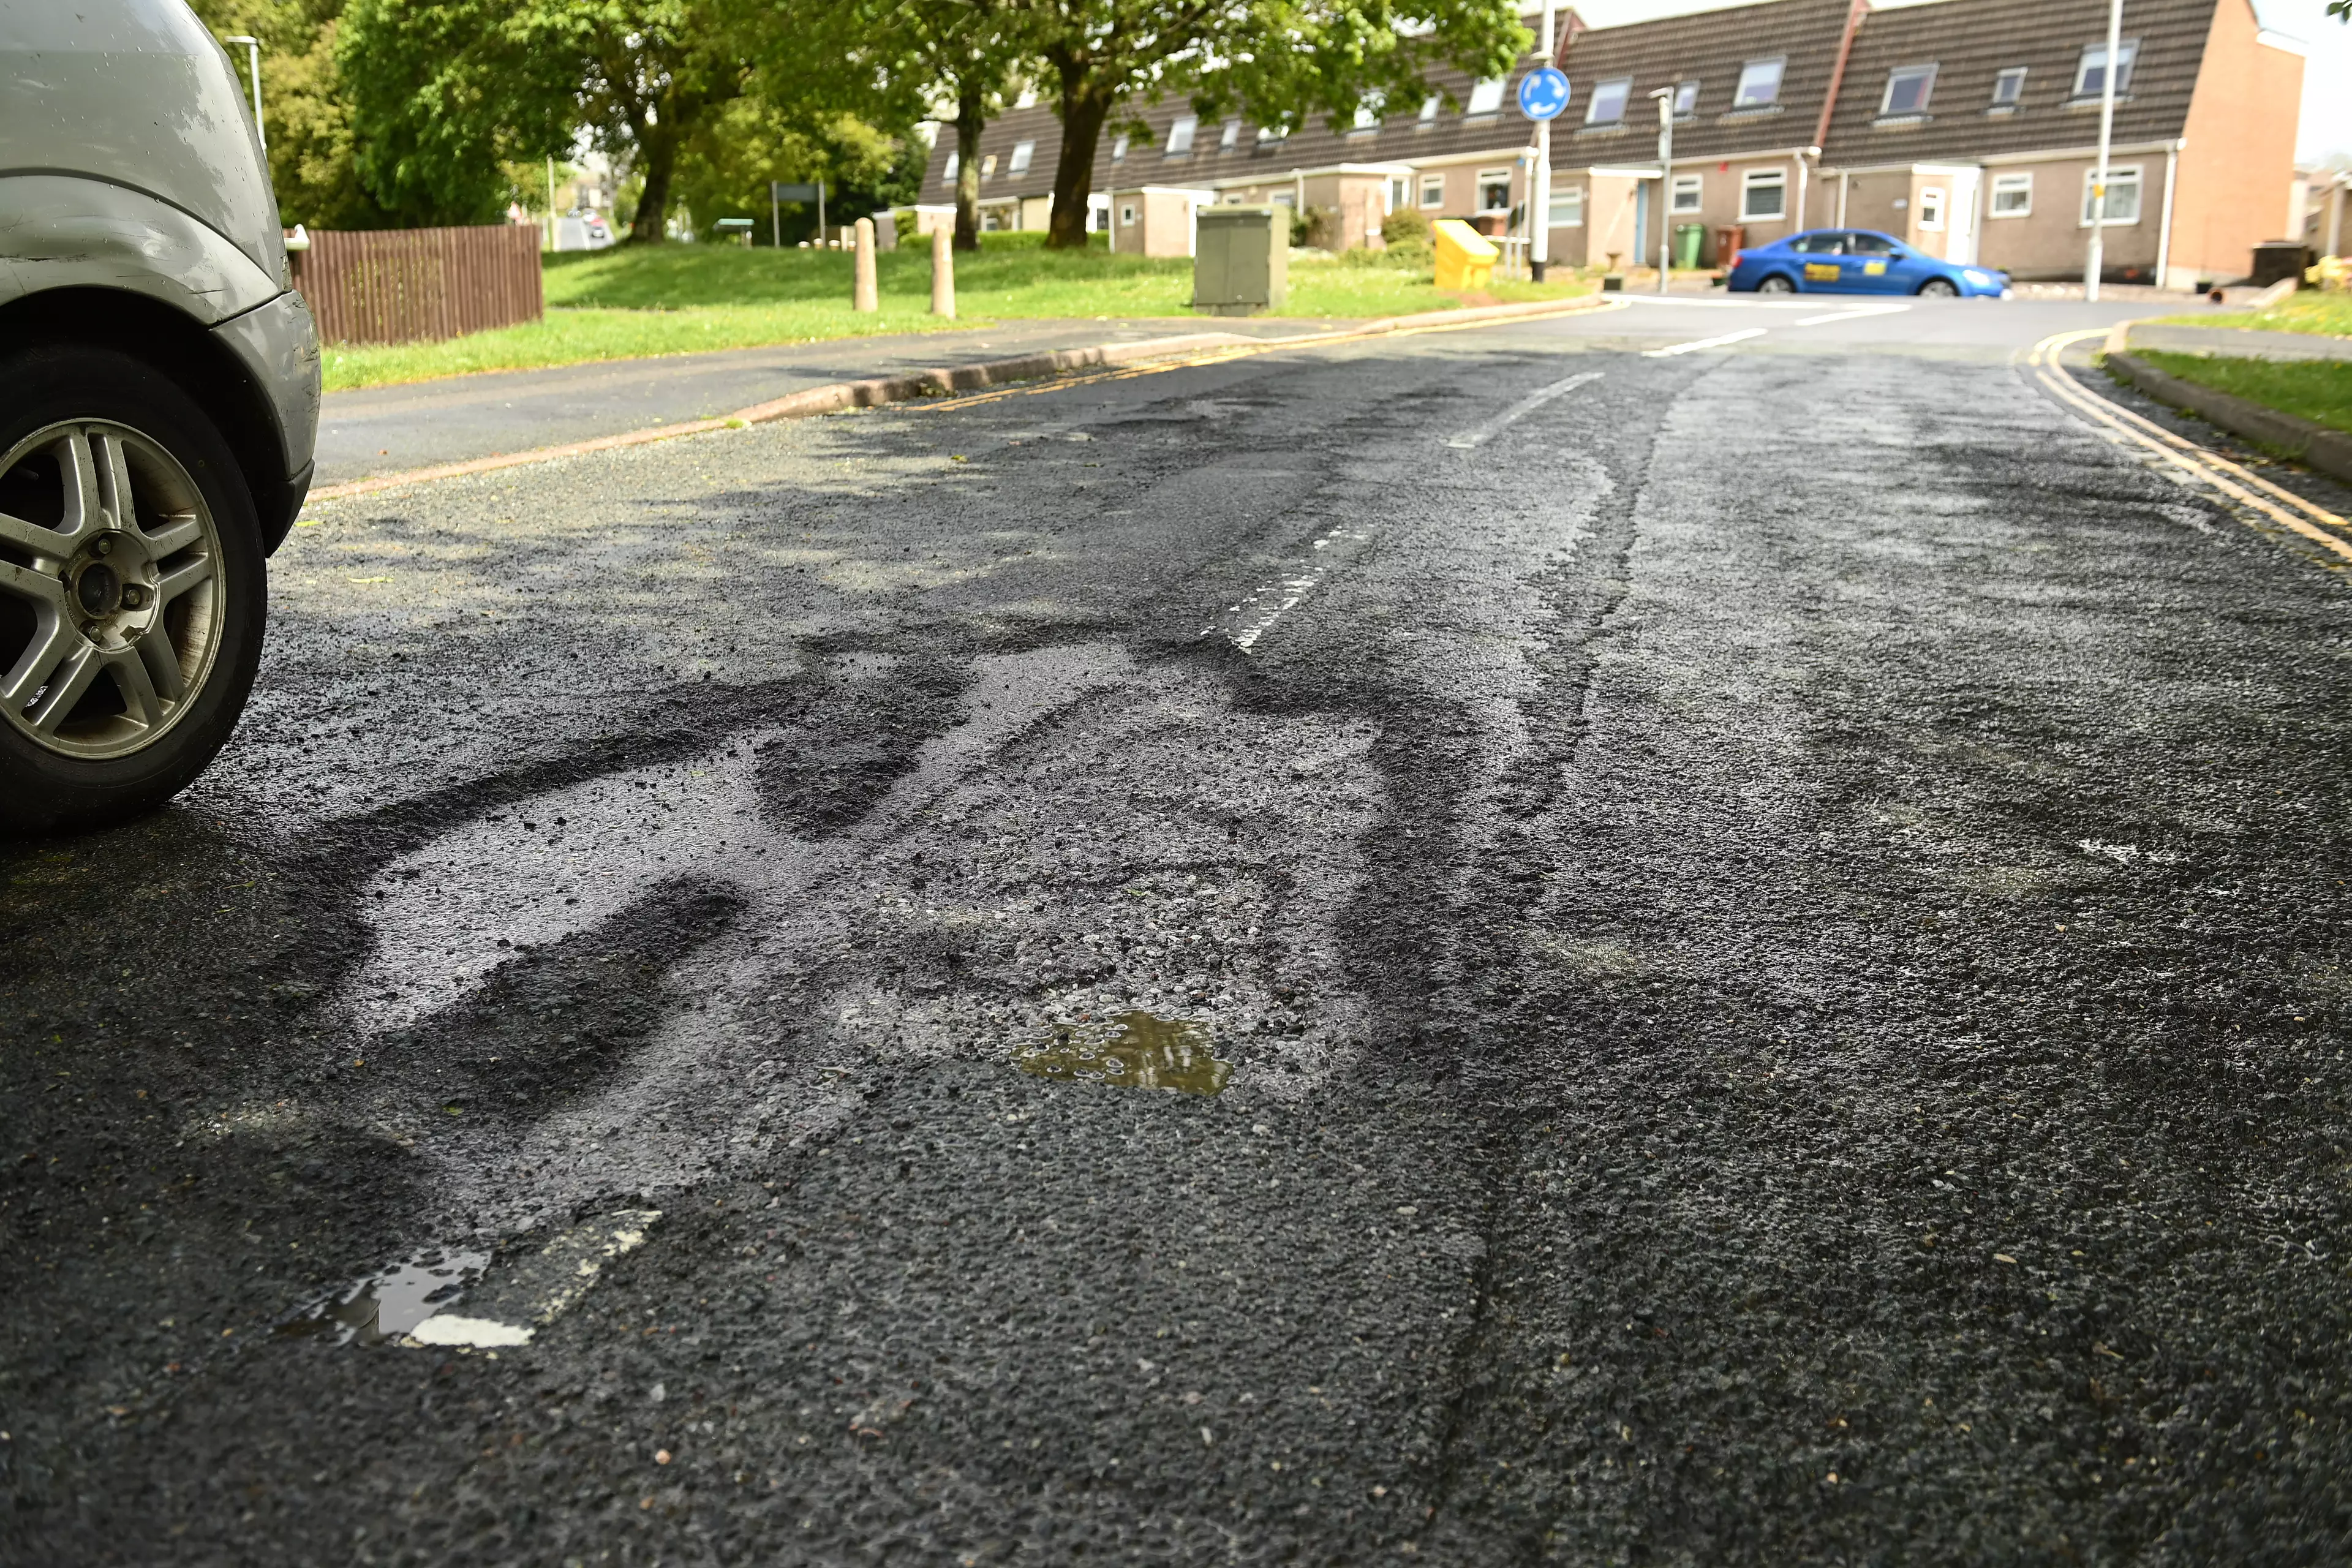 Plymouth Council said no potholes in Penrith Gardens required immediate repair.